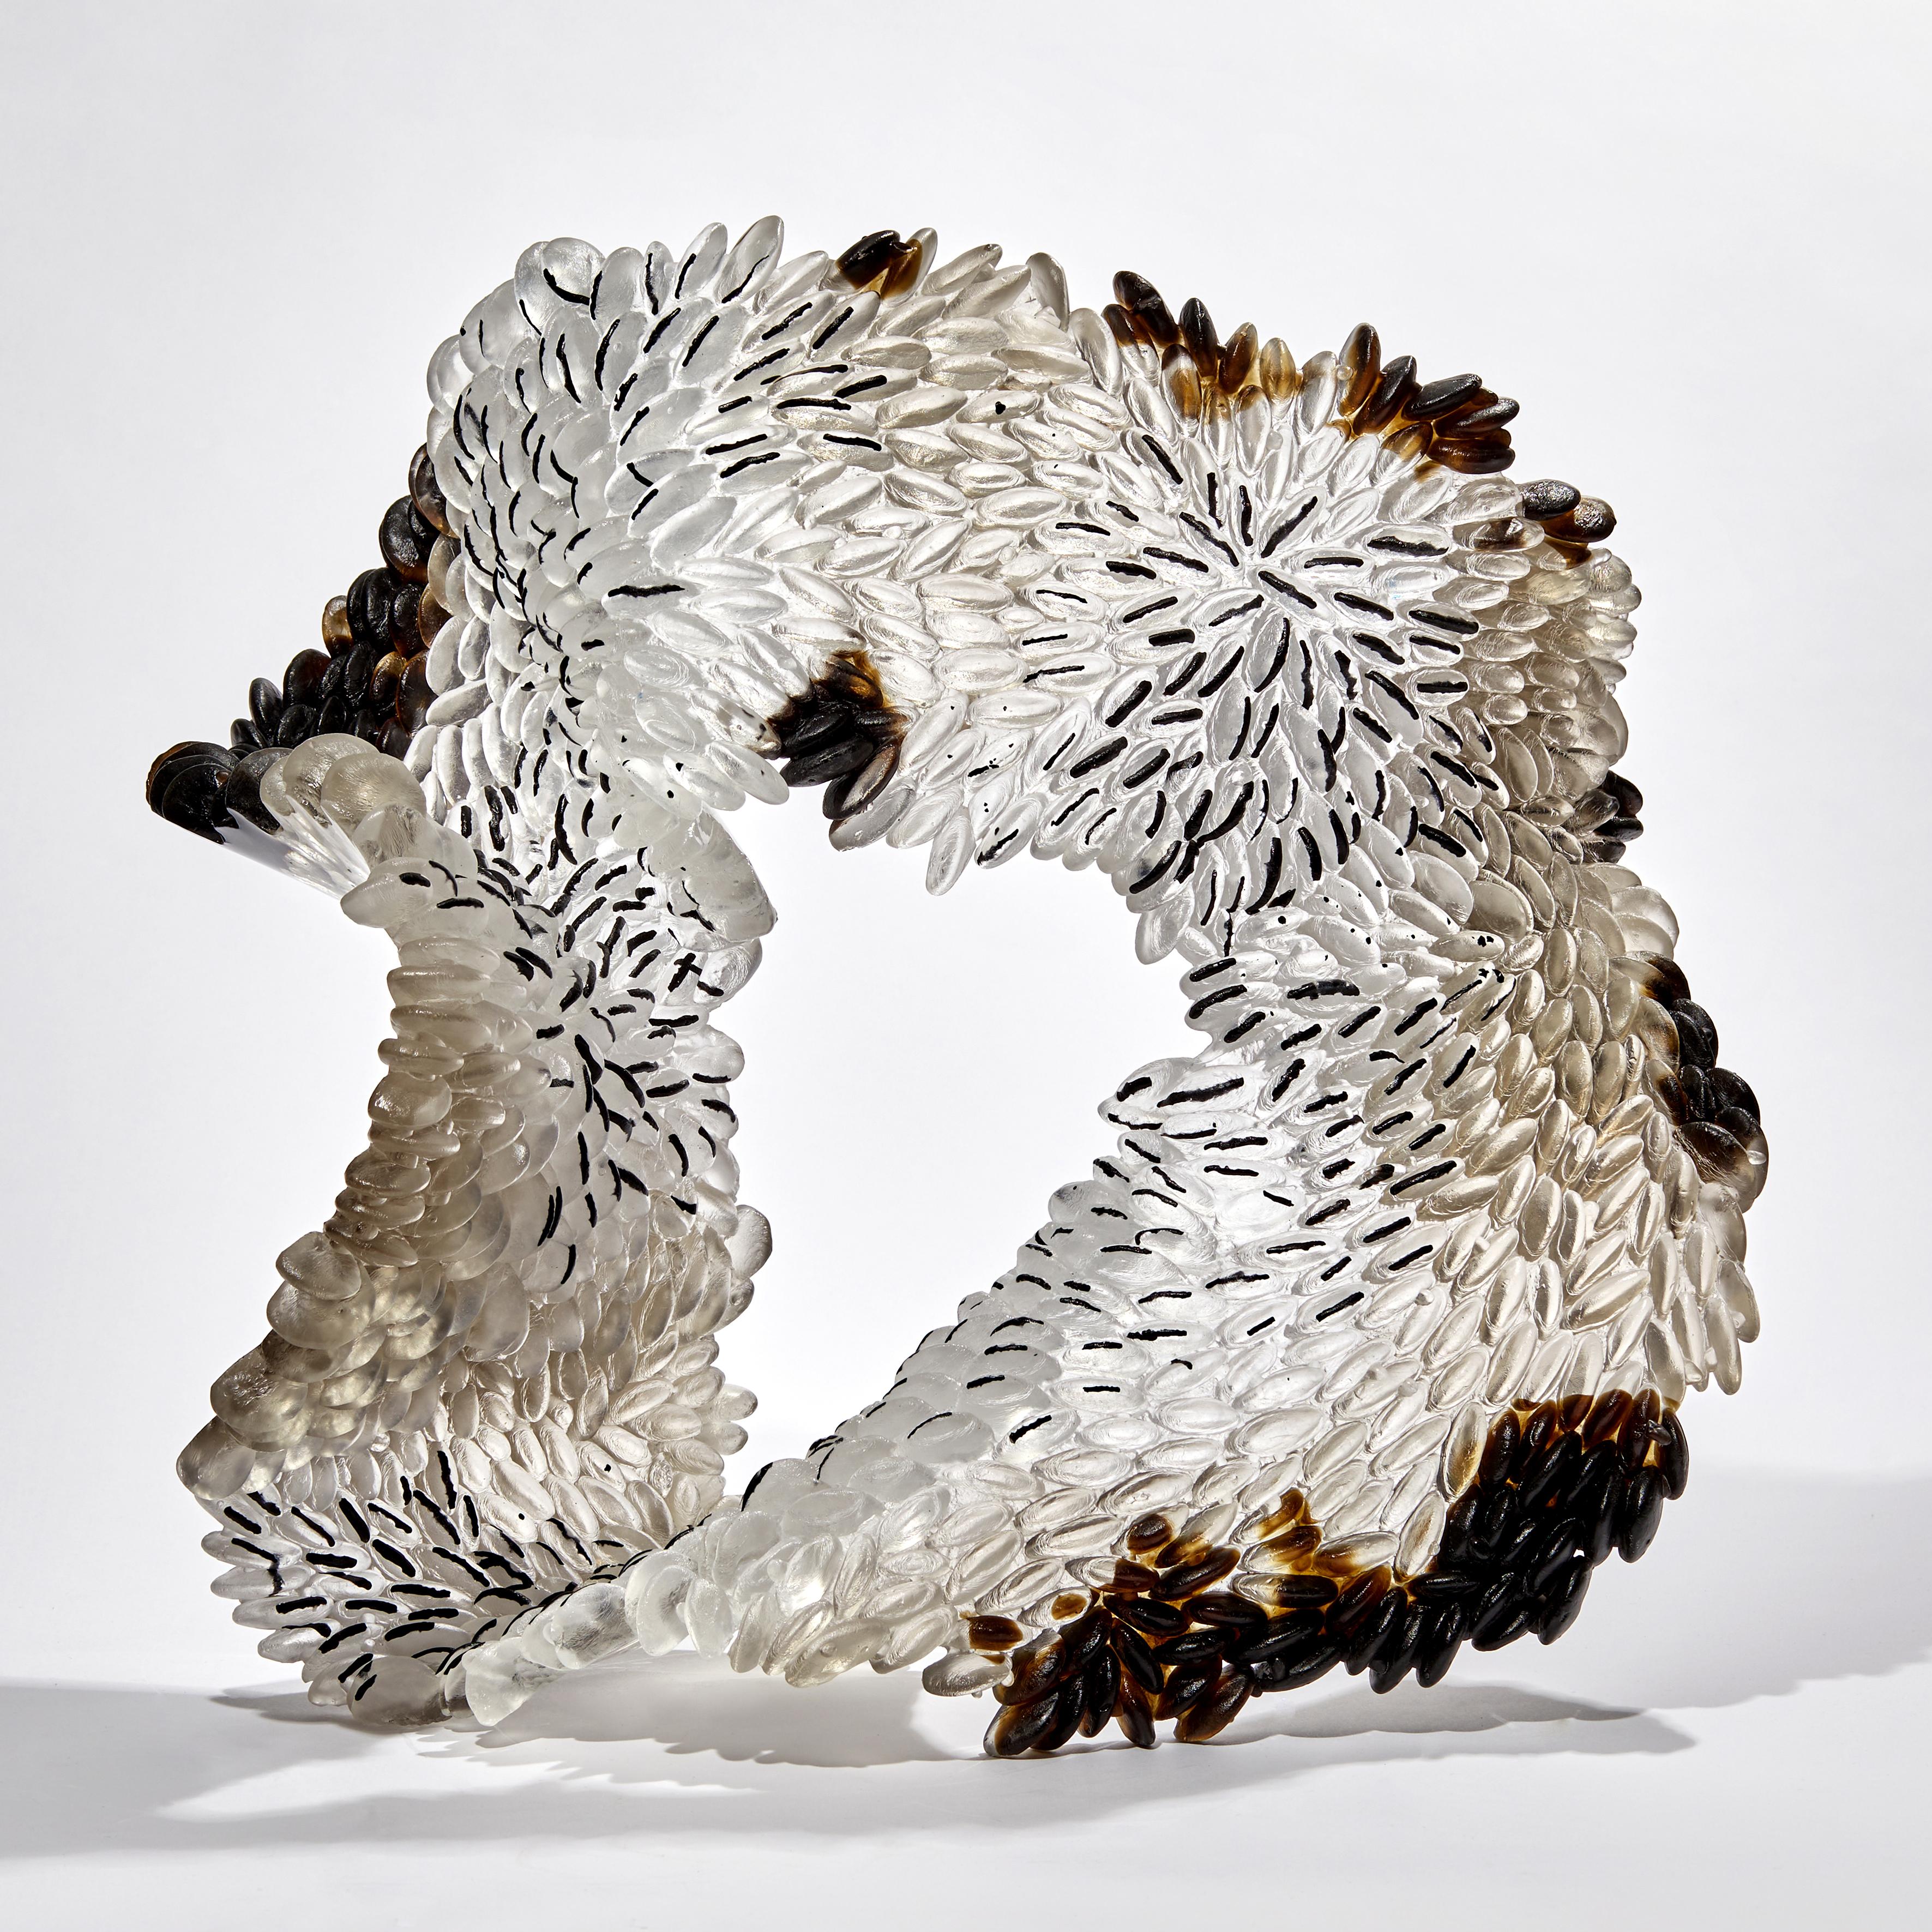 Murmur is a unique textured glass sculpture in clear, dark brown, black and bronze by the British artist Nina Casson McGarva.

Casson McGarva firstly casts her glass in a flat mould where she introduces all of the beautifully detailed, scaled